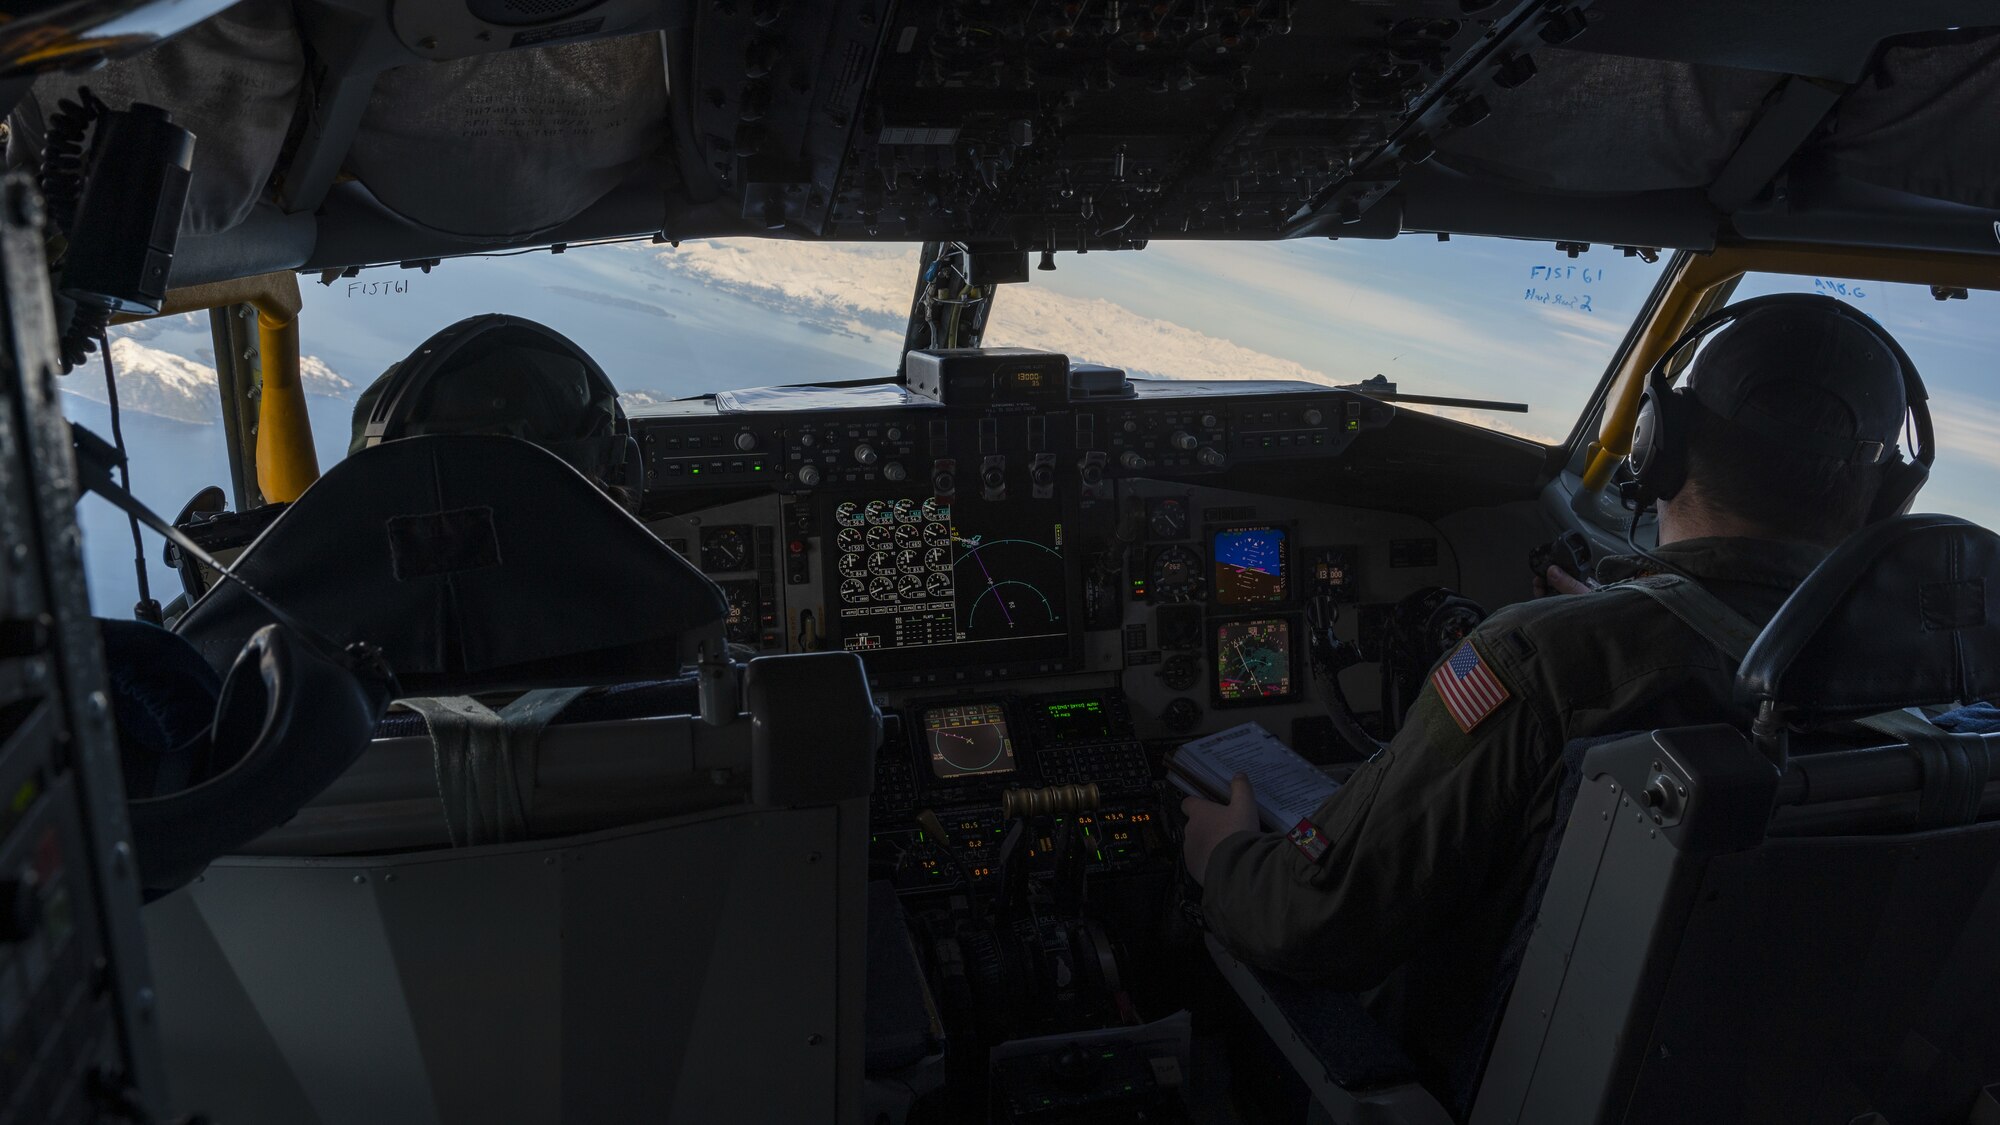 U.S. Air Force Capt. Christina Kelvin and 1st Lt. Jake McMullen, 384th Air Refueling Squadron pilots, prepare to land at Eielson Air Force Base, Alaska, March 7, 2023. Aircrew from the 384th Air Refueling Squadron conducted an air refueling coronet with Marines from the Marine Fighter Attack Squadron 312, demonstrating the critical role mobility forces have in projecting the joint force anywhere, anytime. (U.S. Air Force photo by Staff Sgt. Lawrence Sena)